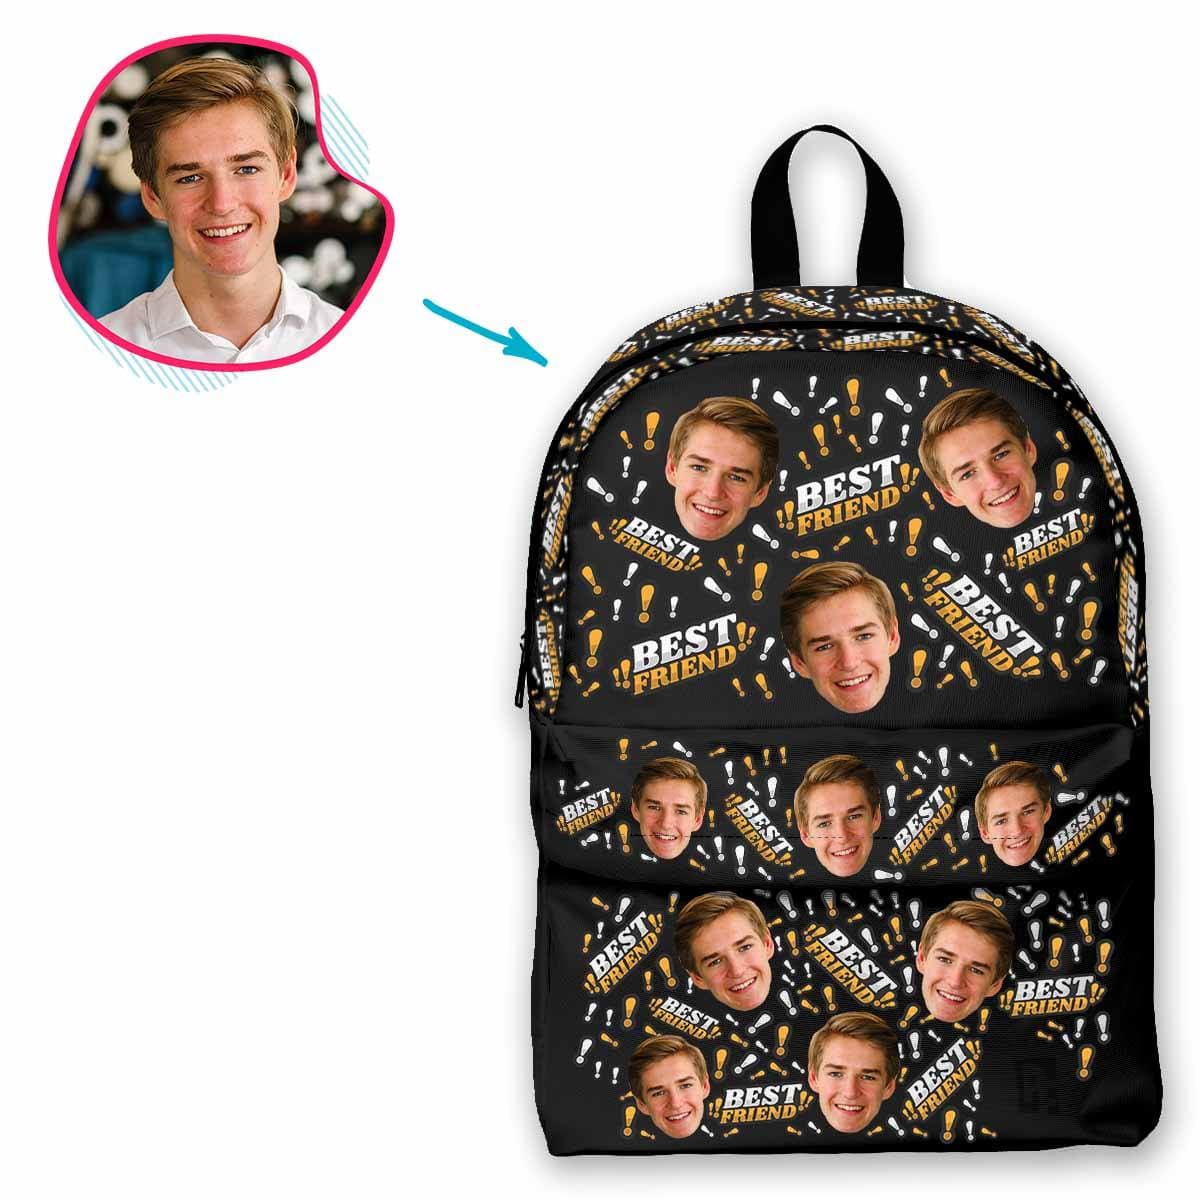 dark Best Friend classic backpack personalized with photo of face printed on it